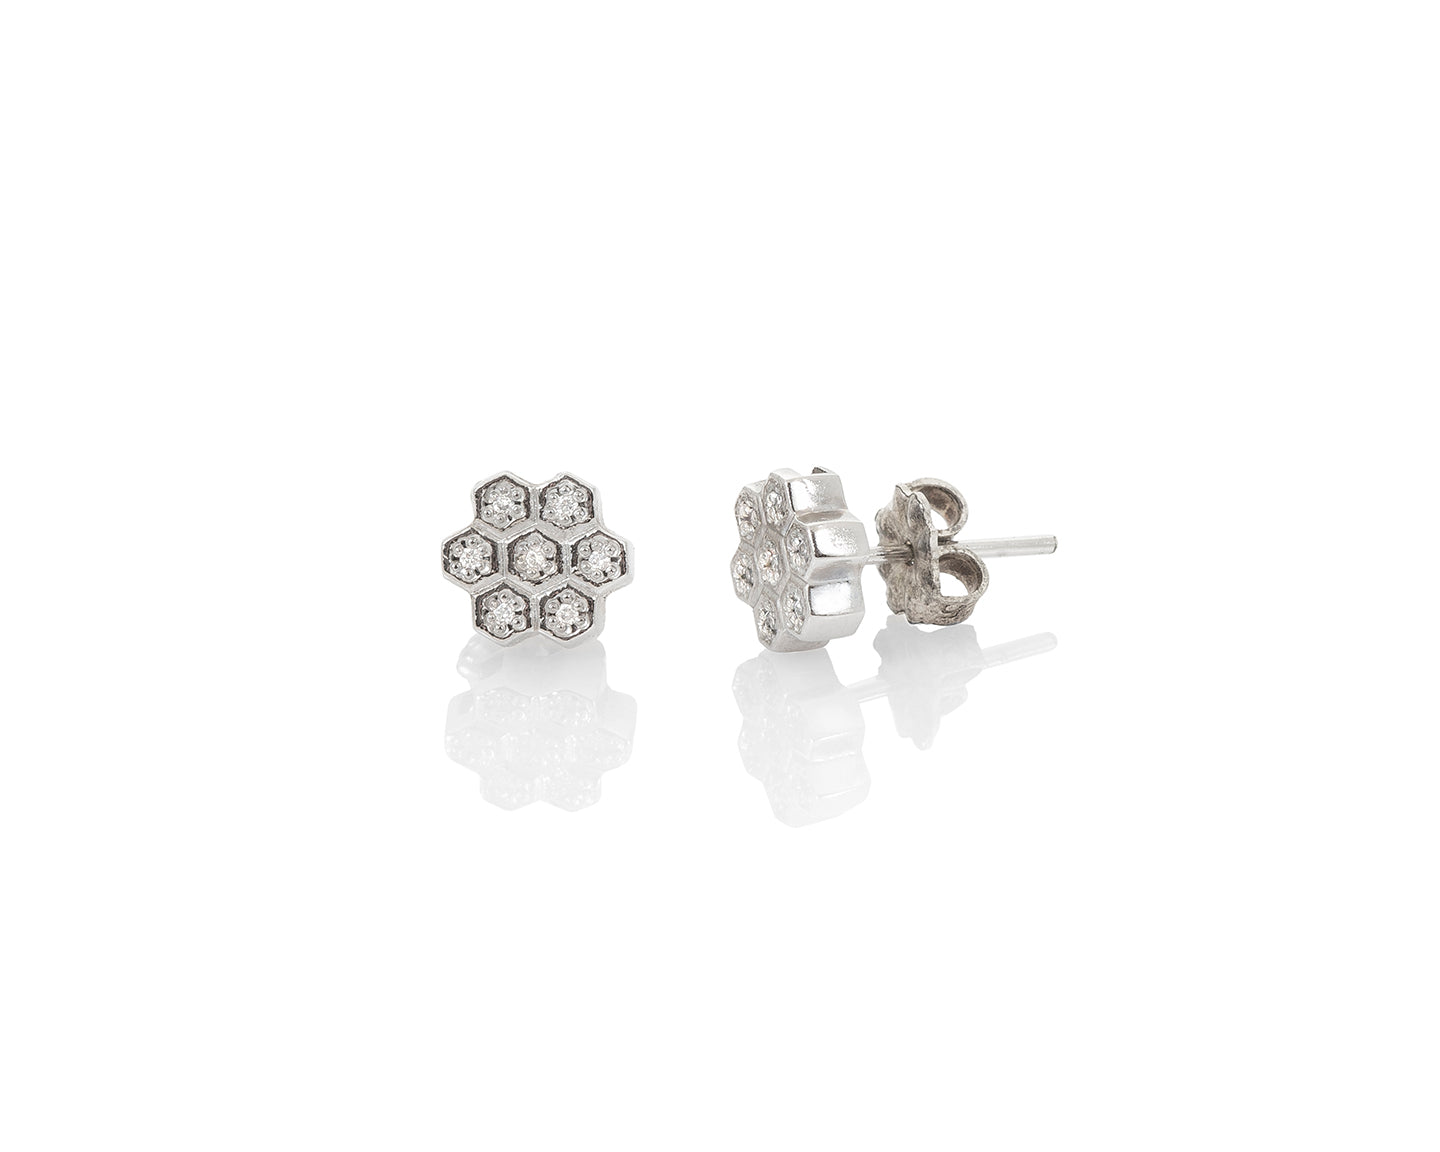 silver honeycomb cluster earrings with conflict free diamonds by Peggy Skemp.